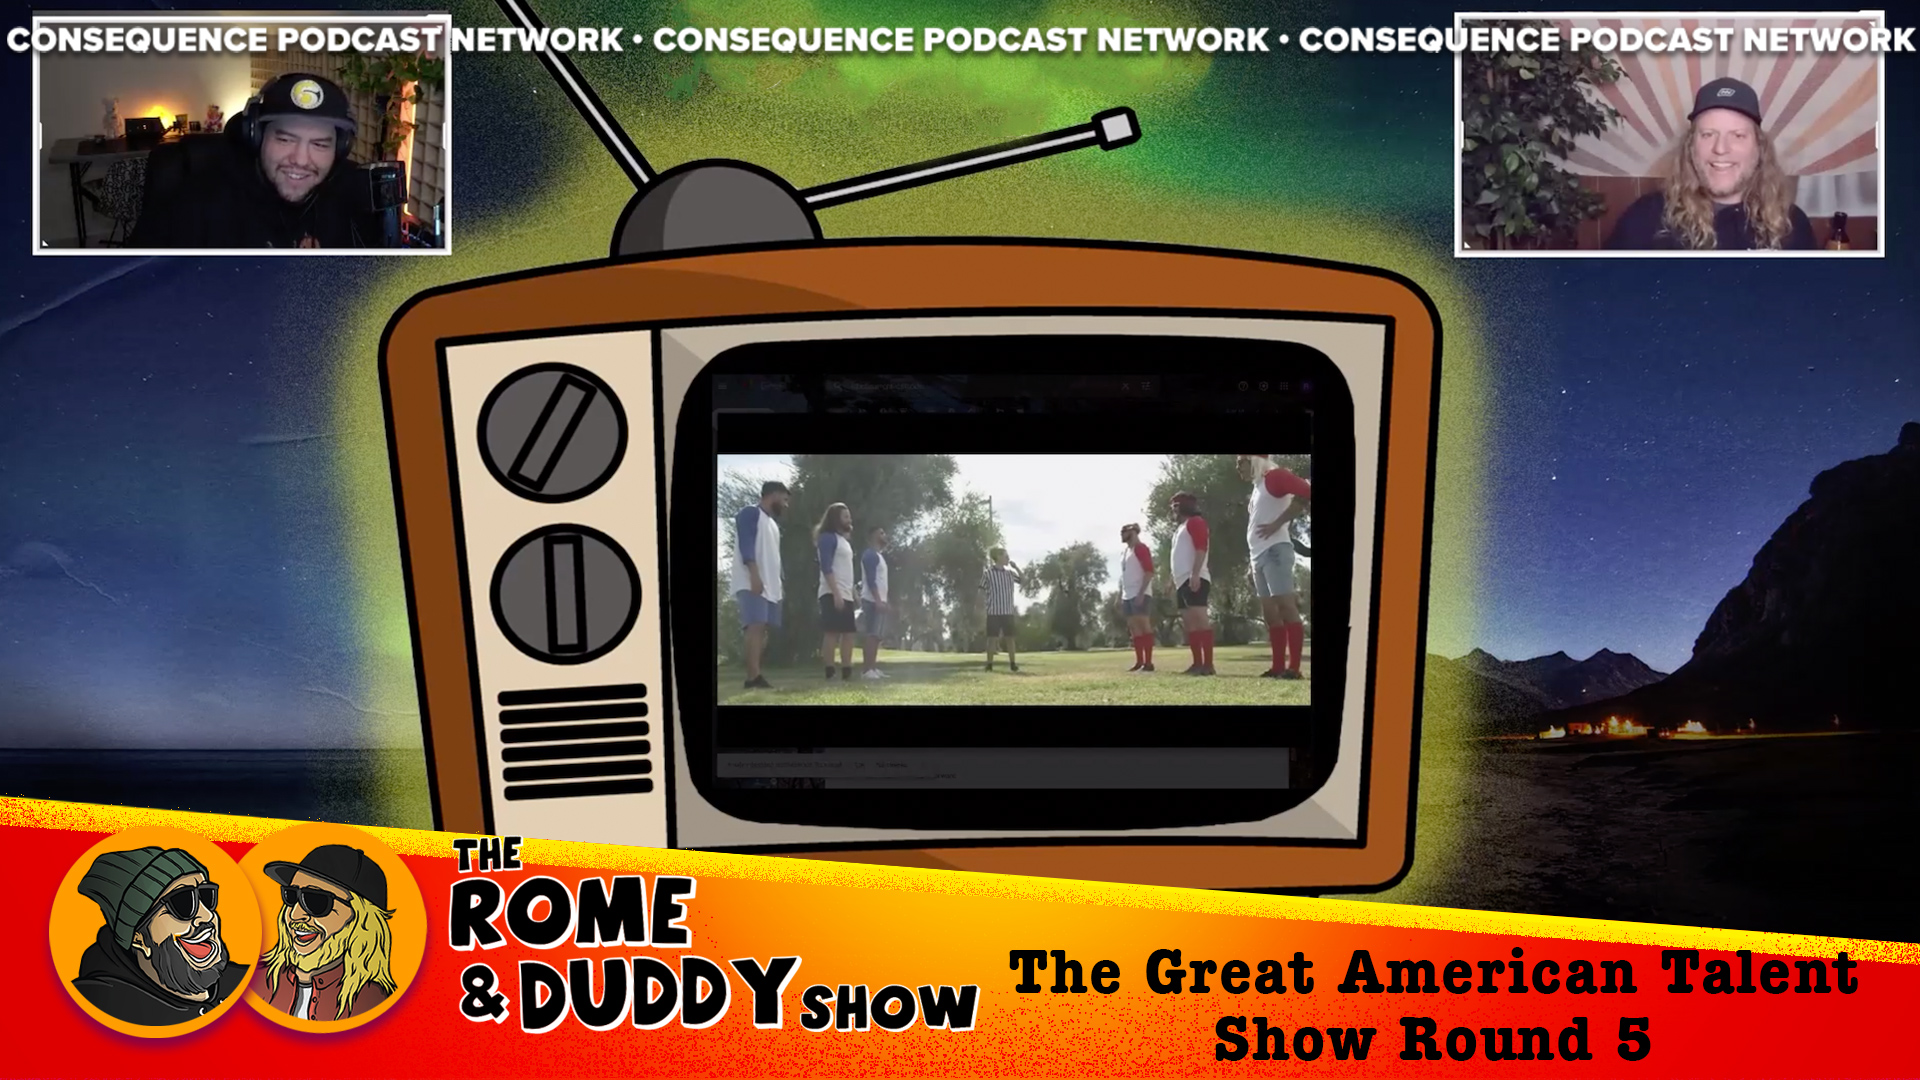 The Rome and Duddy Show: The Great American Talent Show Round 5